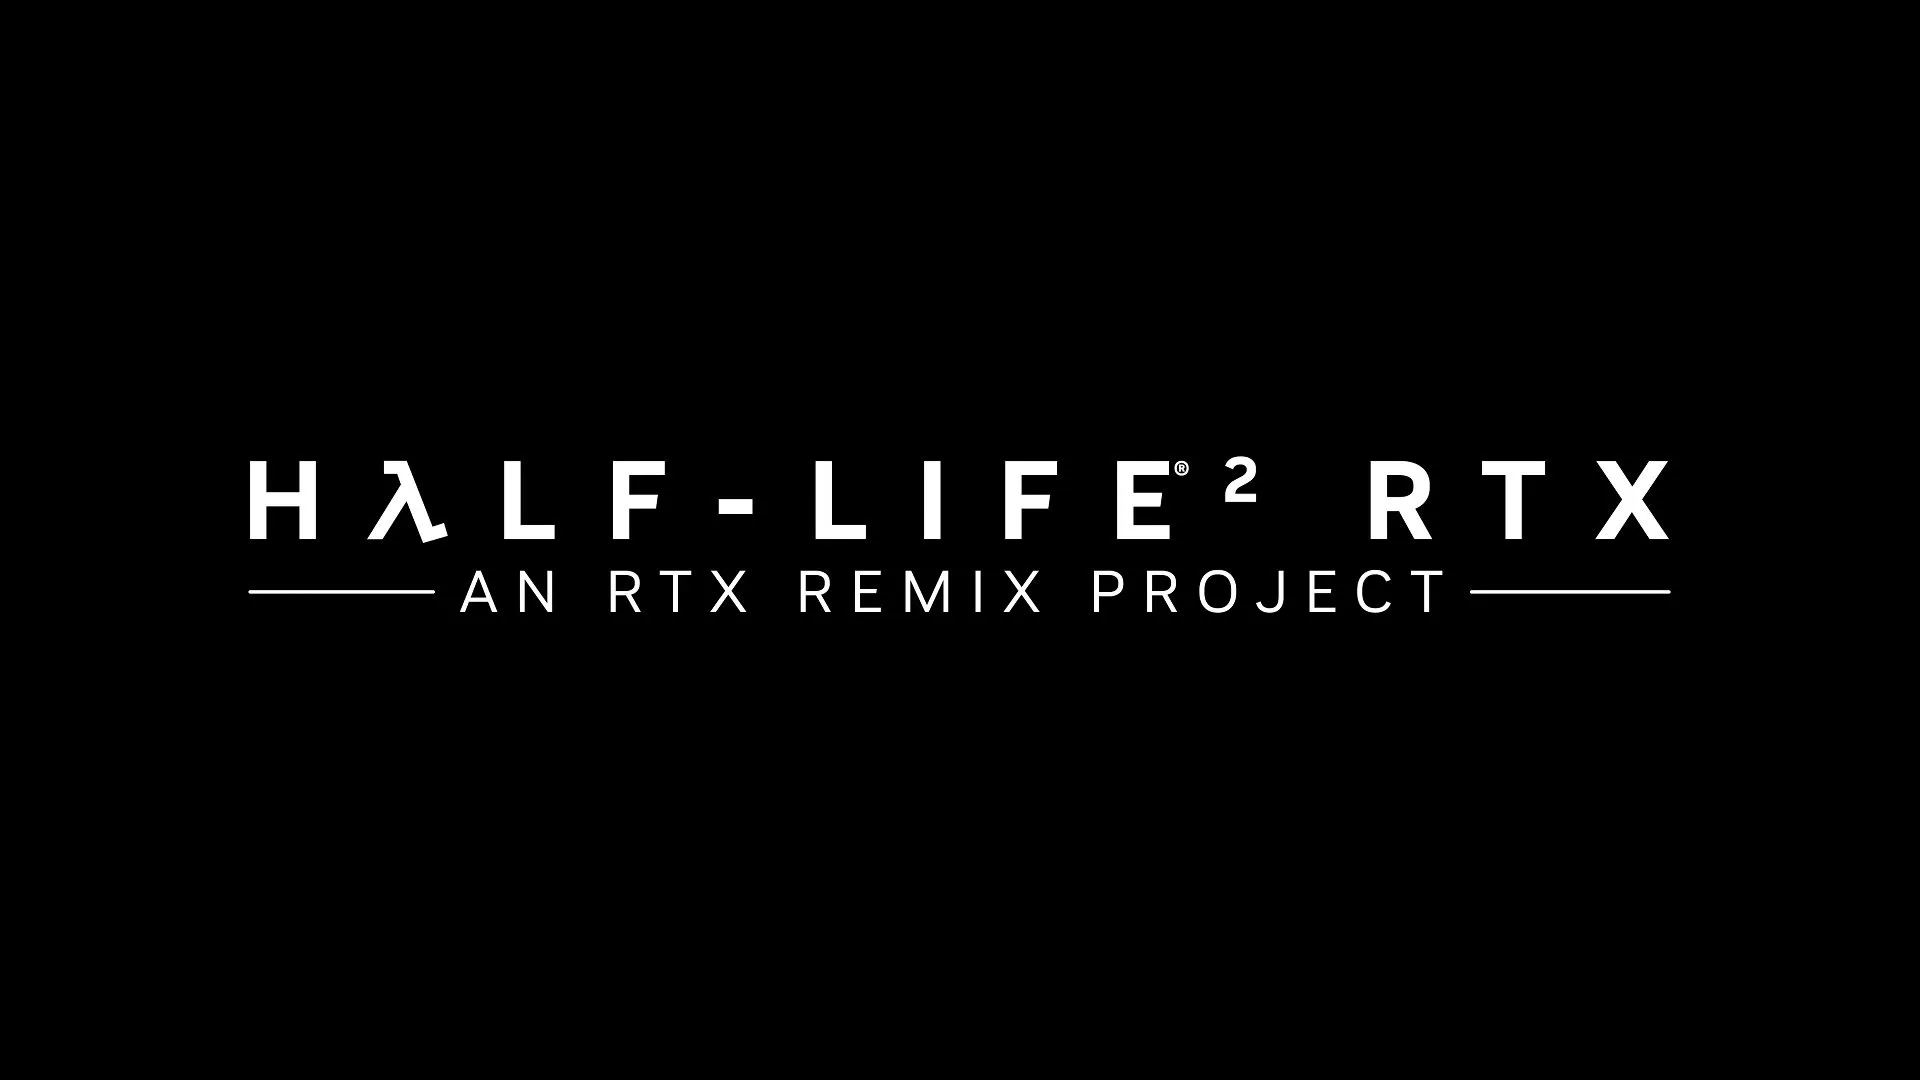 Half-Life 2 RTX, An RTX Remix Project - Announce Trailer